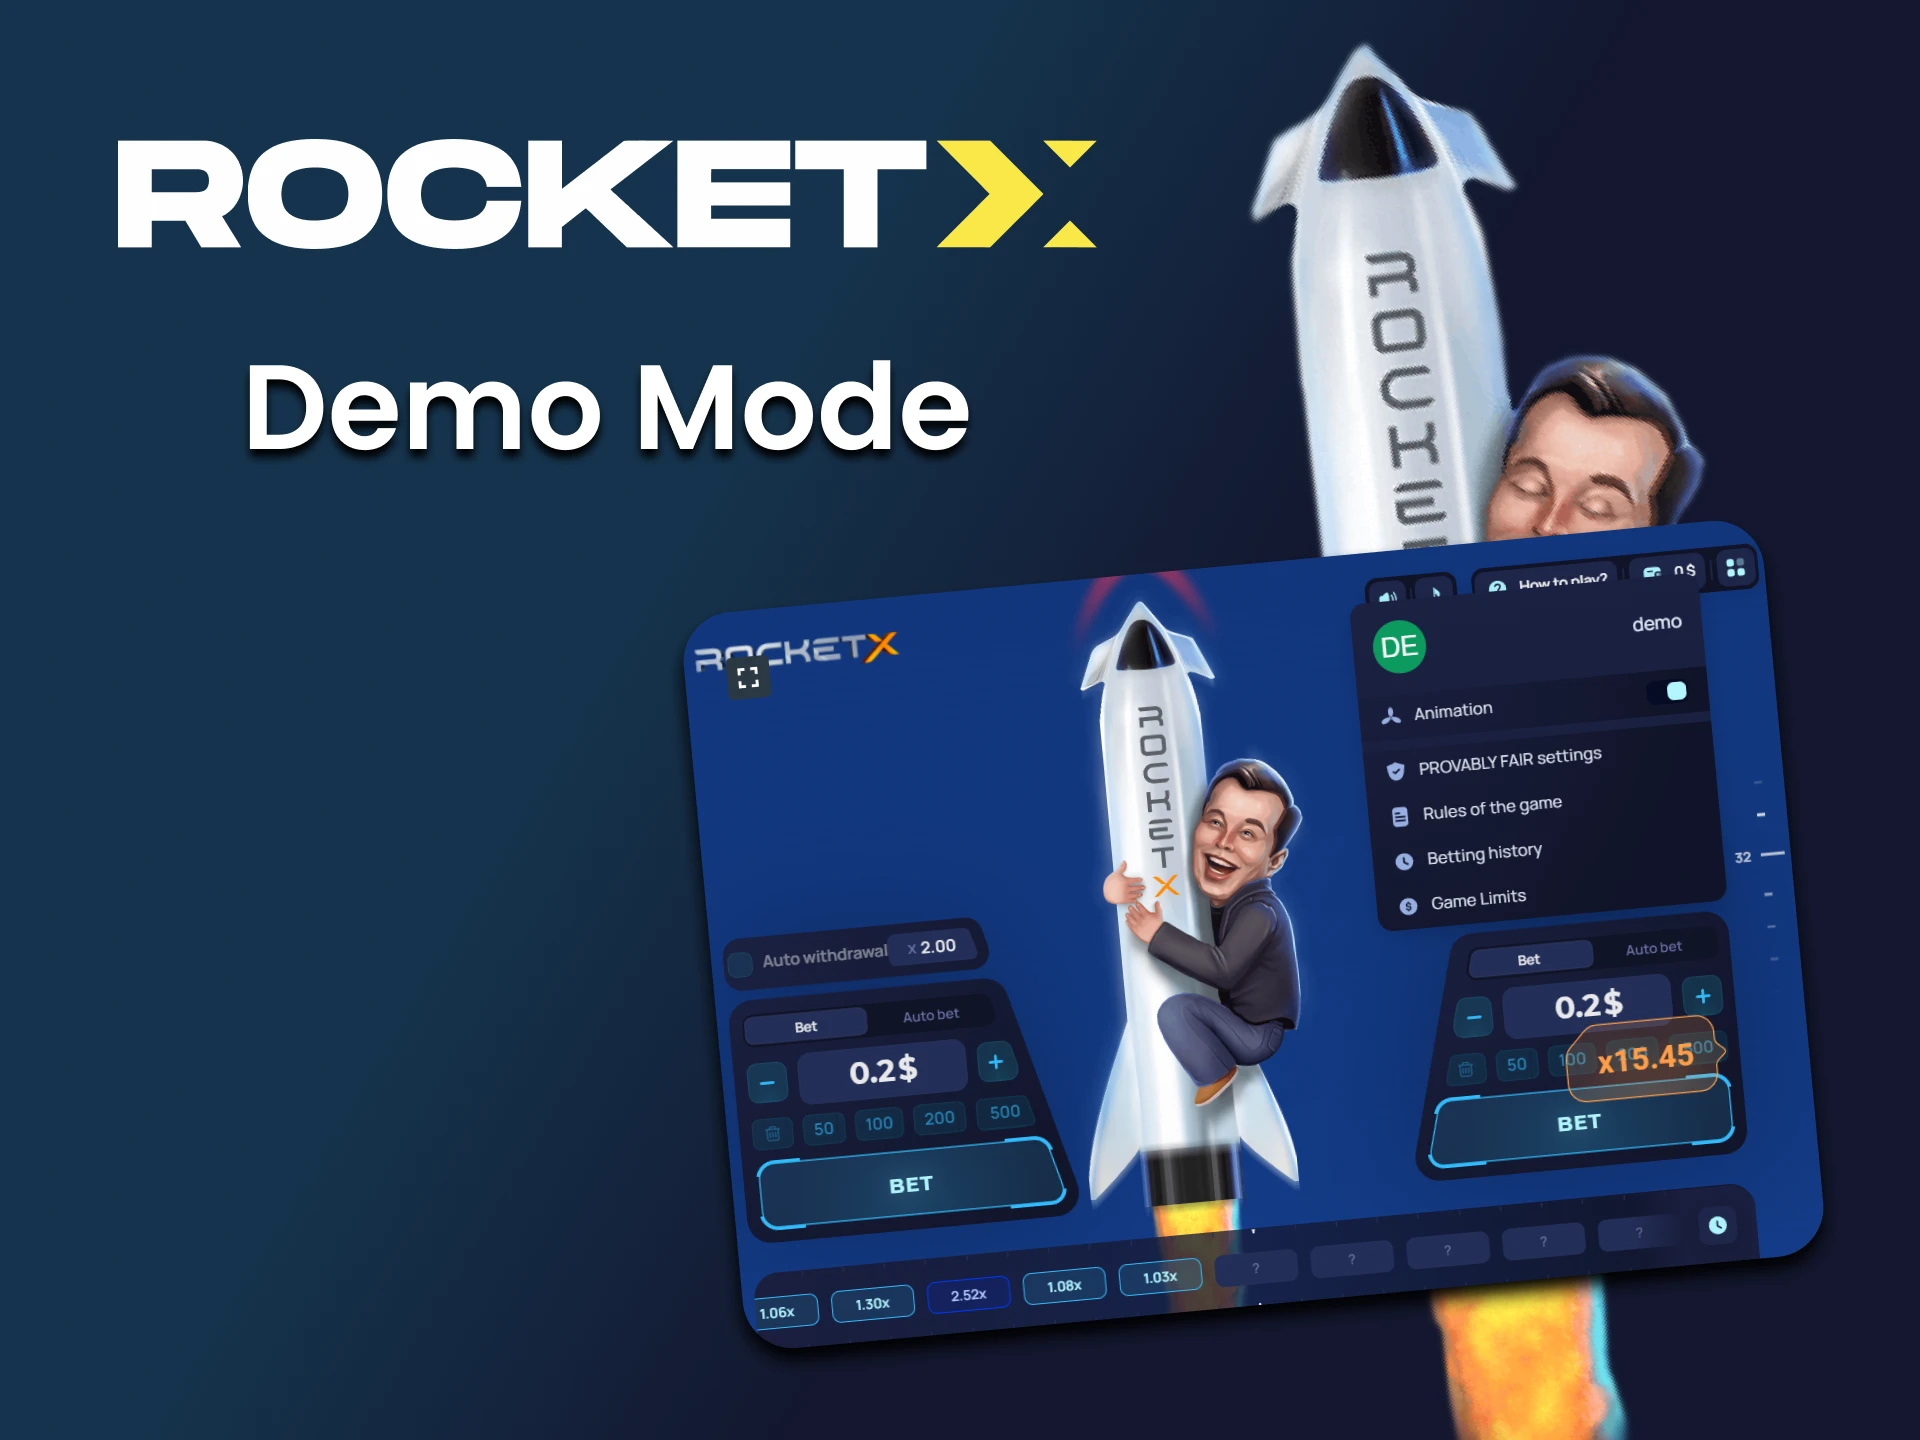 You can test the Rocket X game in the demo mode.